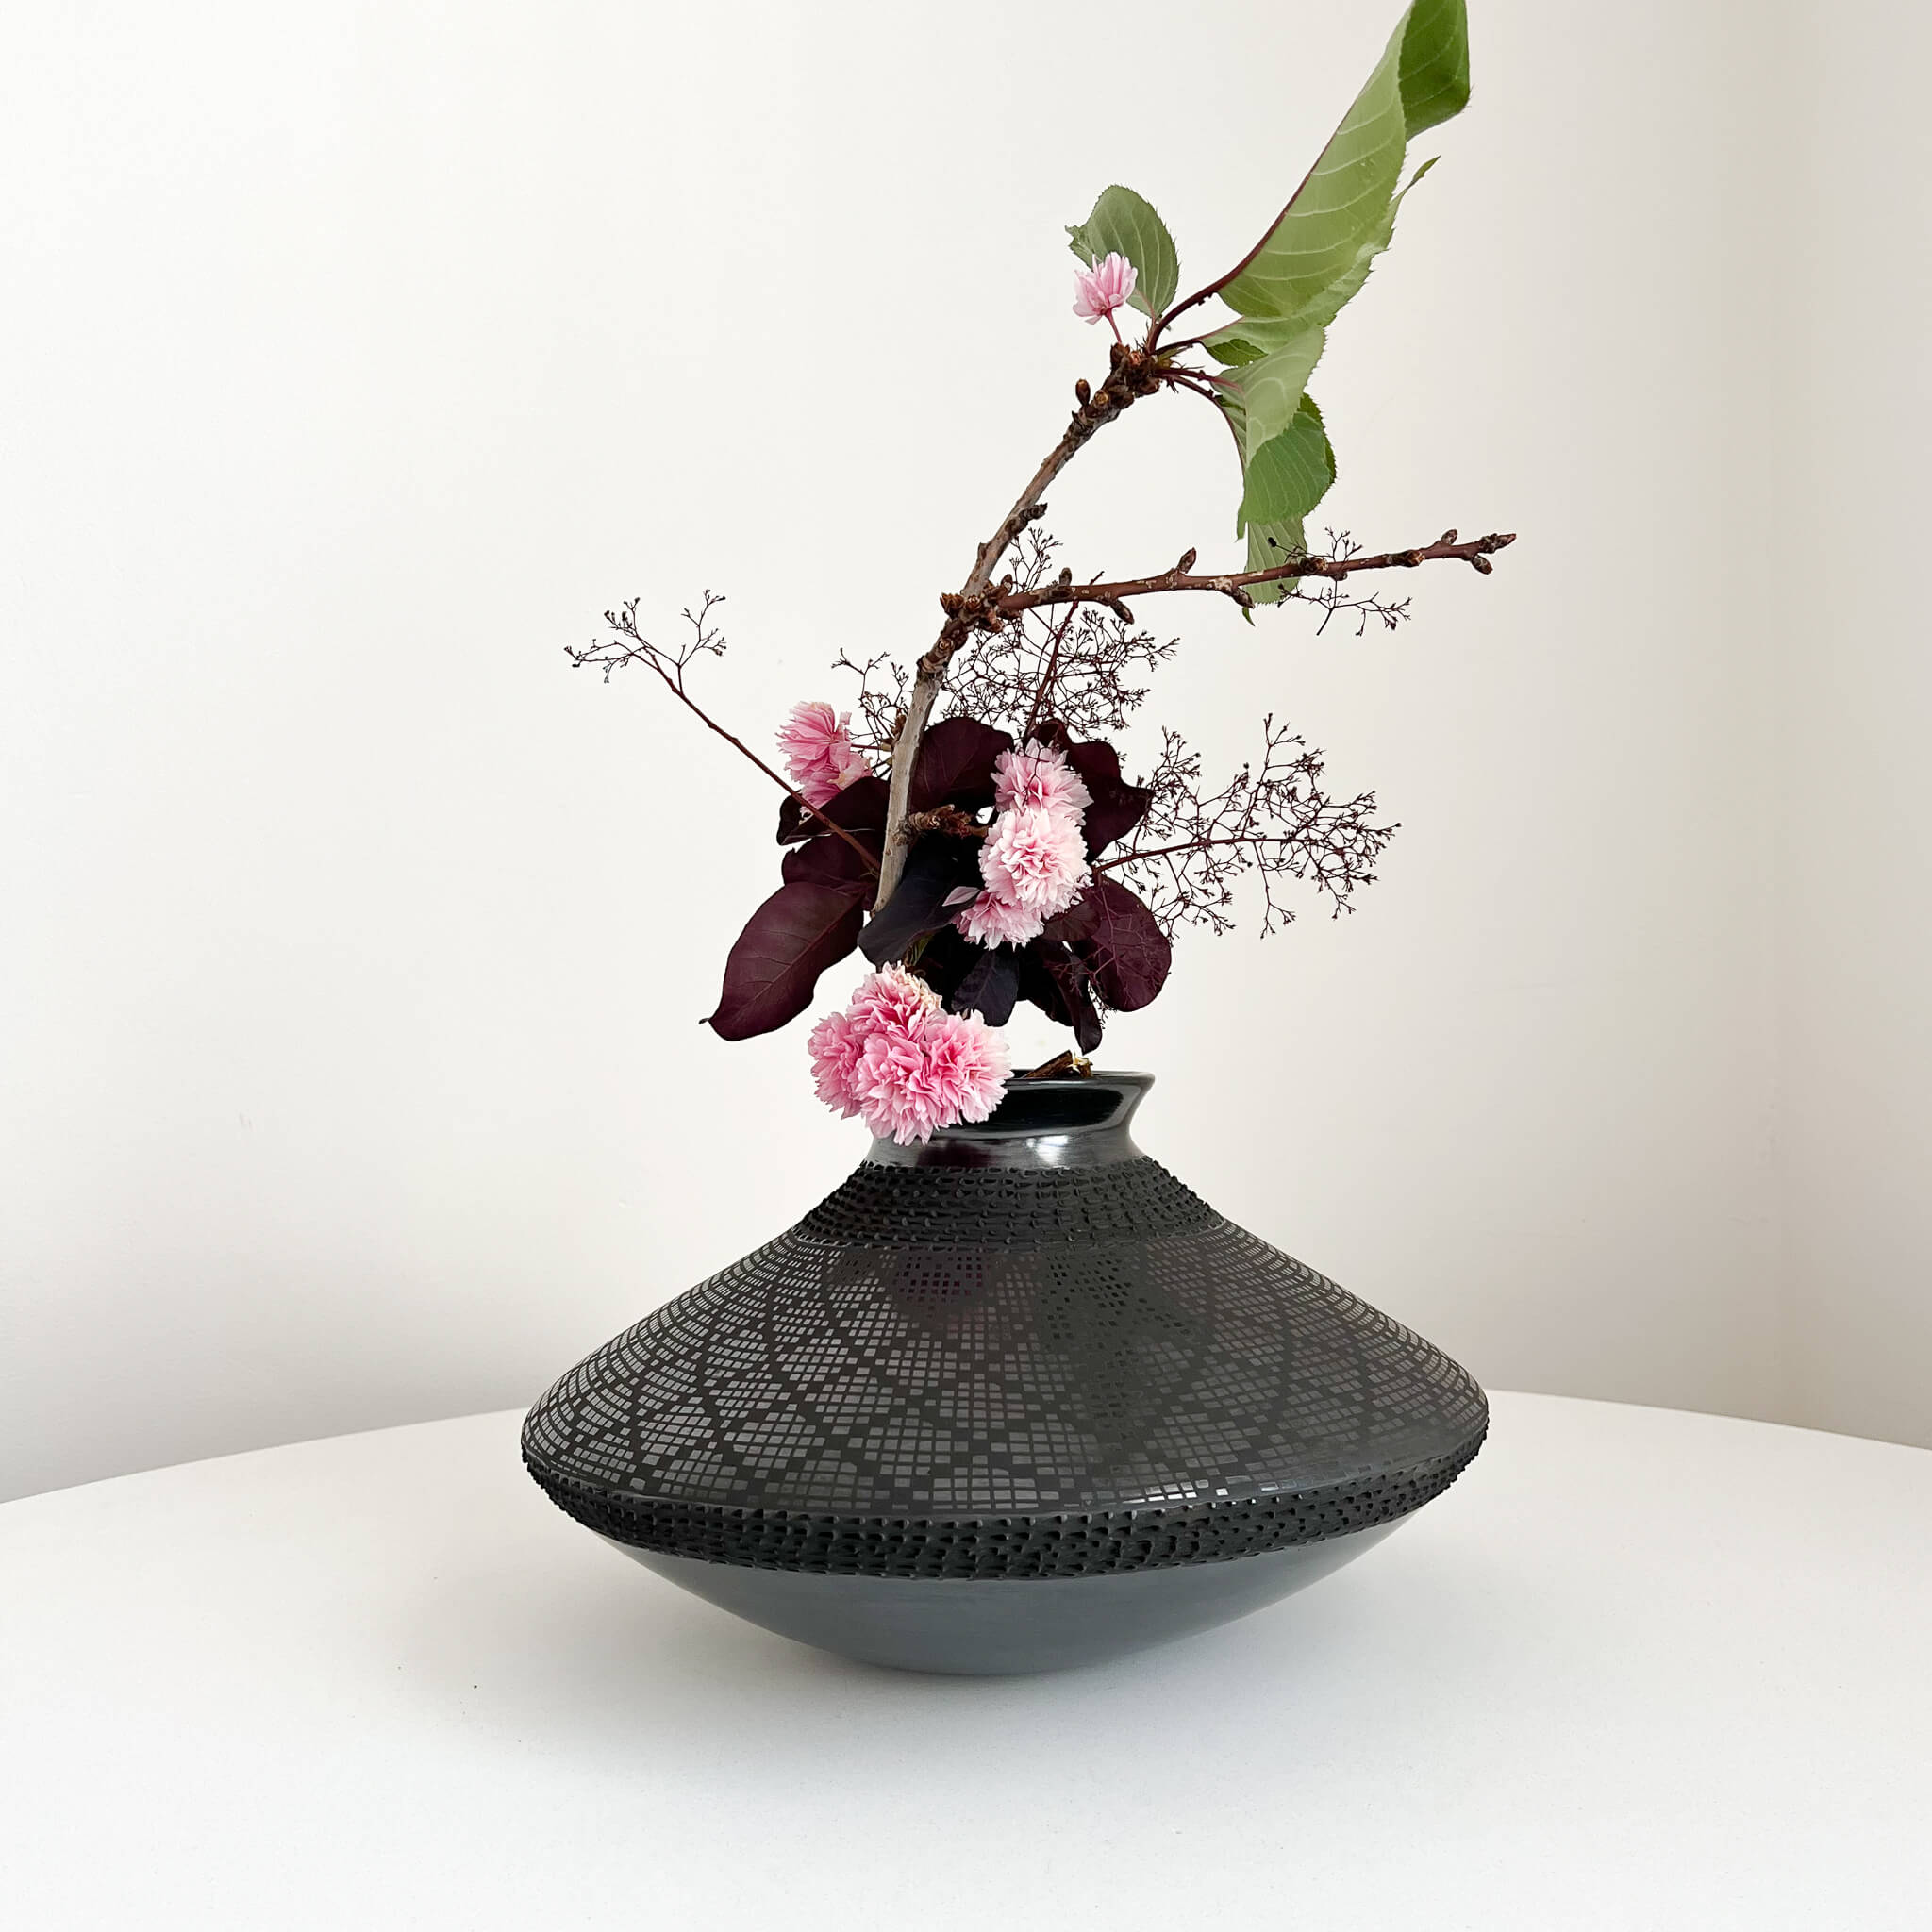 A Mata Ortiz spheroid shaped vase with dry stems and florals.